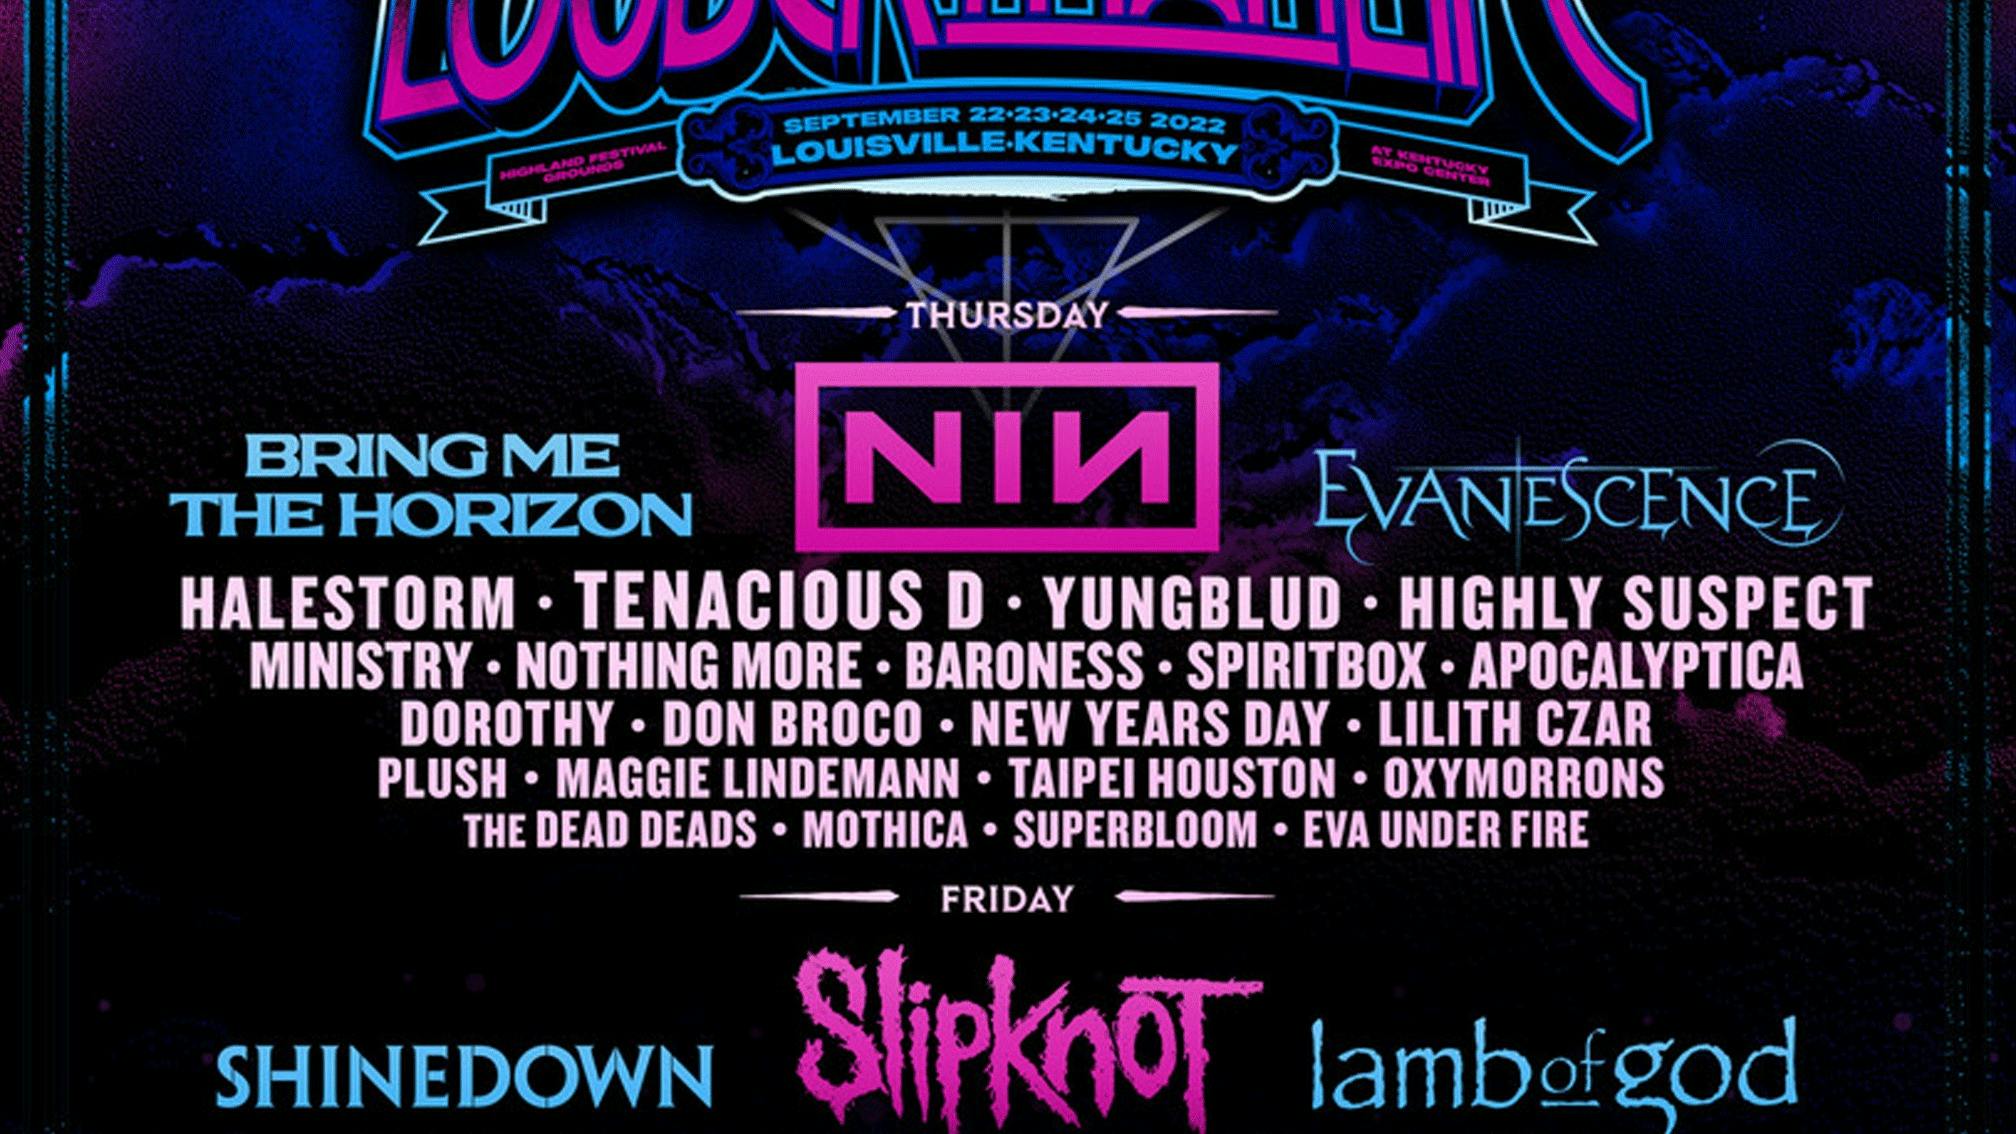 Nine Inch Nails, Slipknot, Red Hot Chili Peppers and more for Louder Than Life 2022